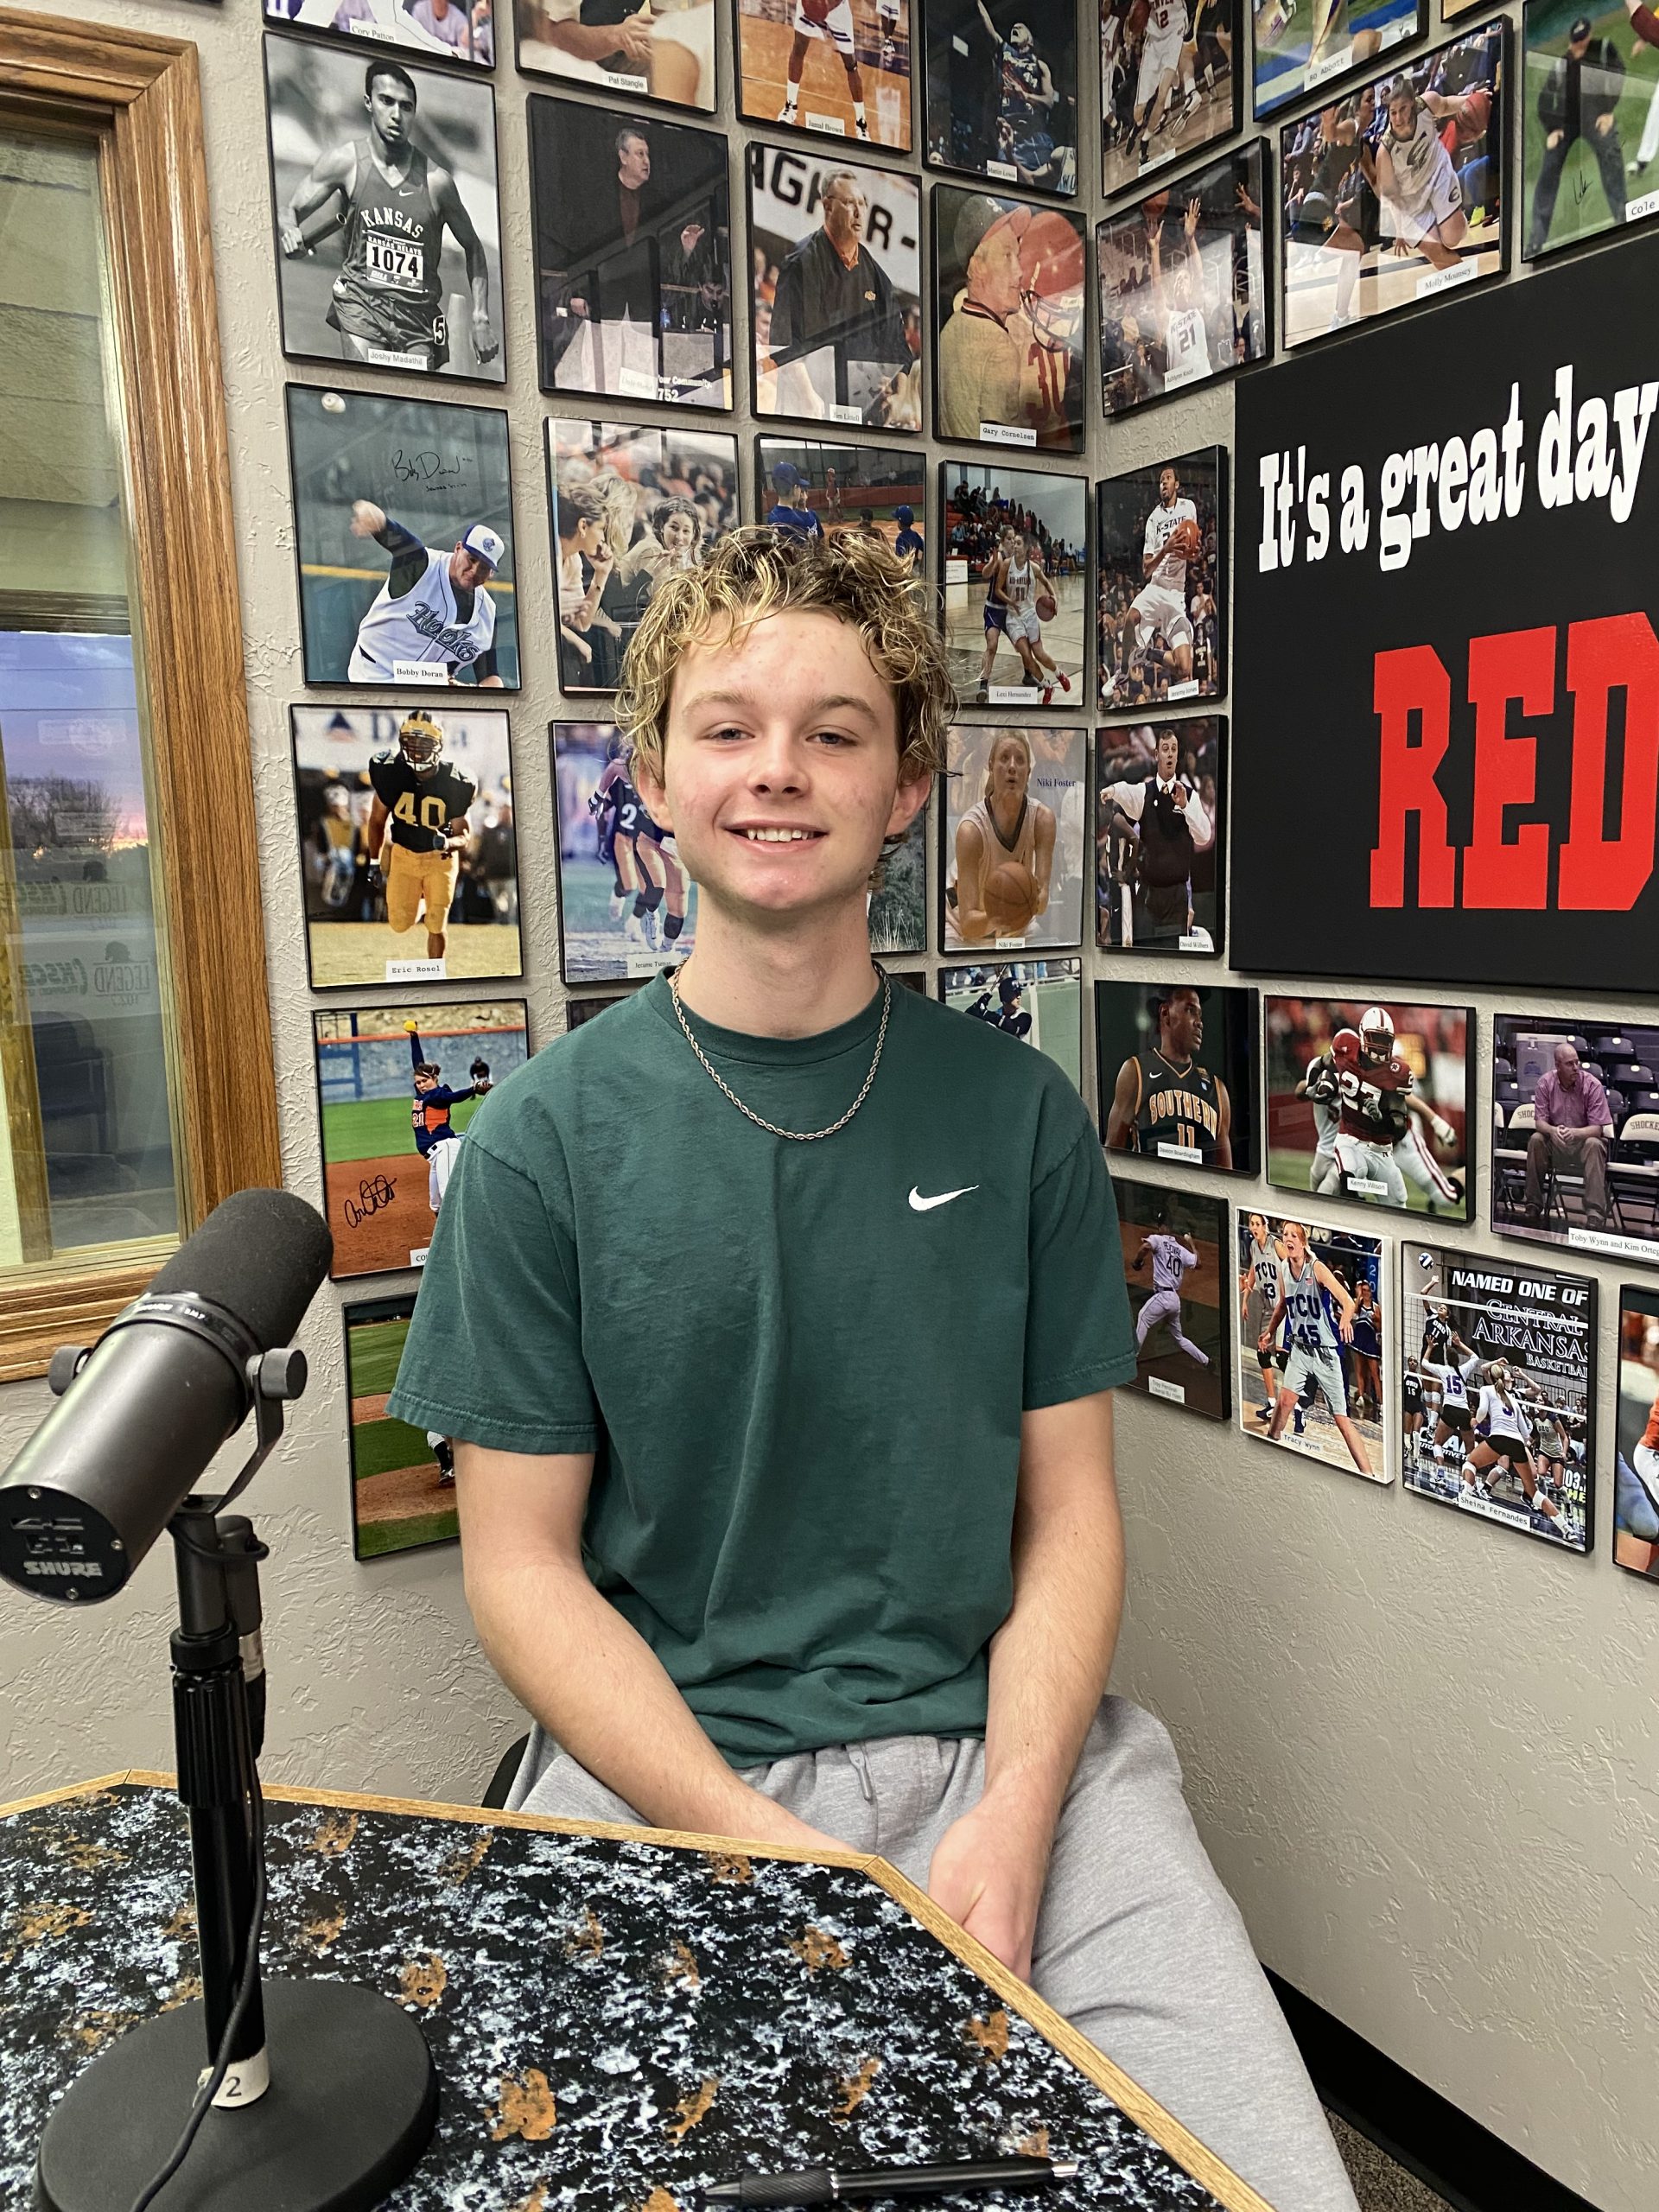 Lexton Batie is Hay Rice and Associates Athlete of the Week